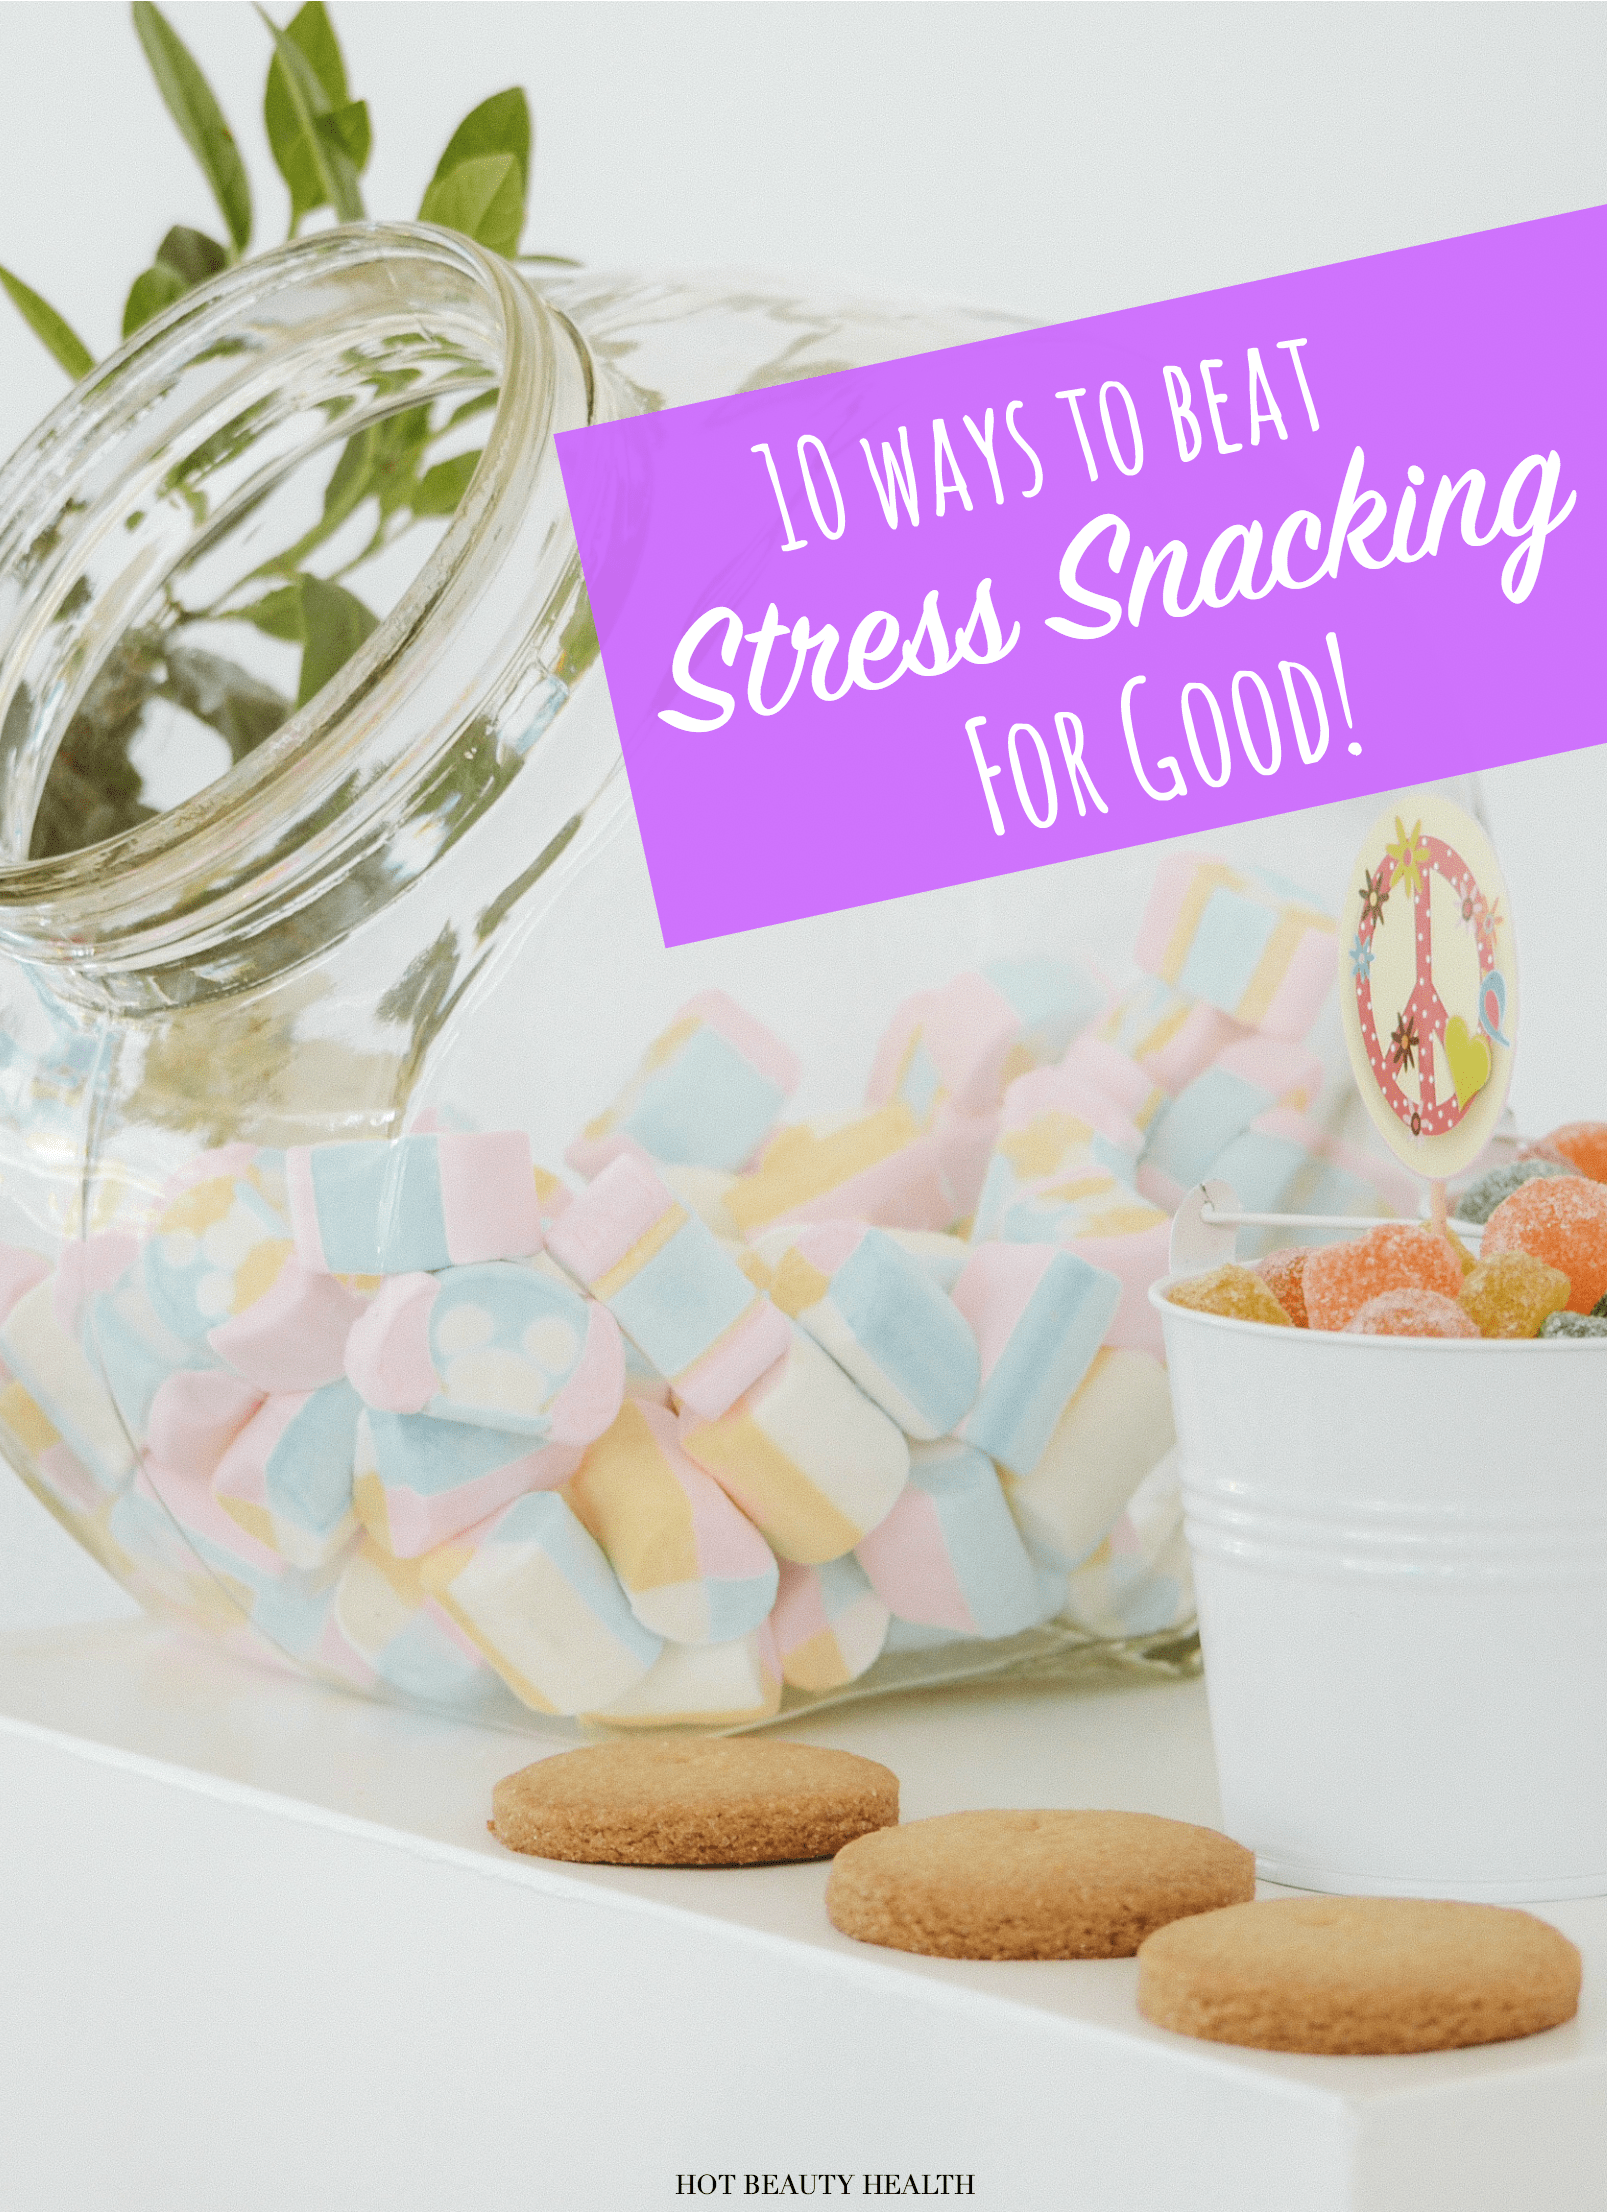 How to Stop Stress Eating For Good: 10 Ways